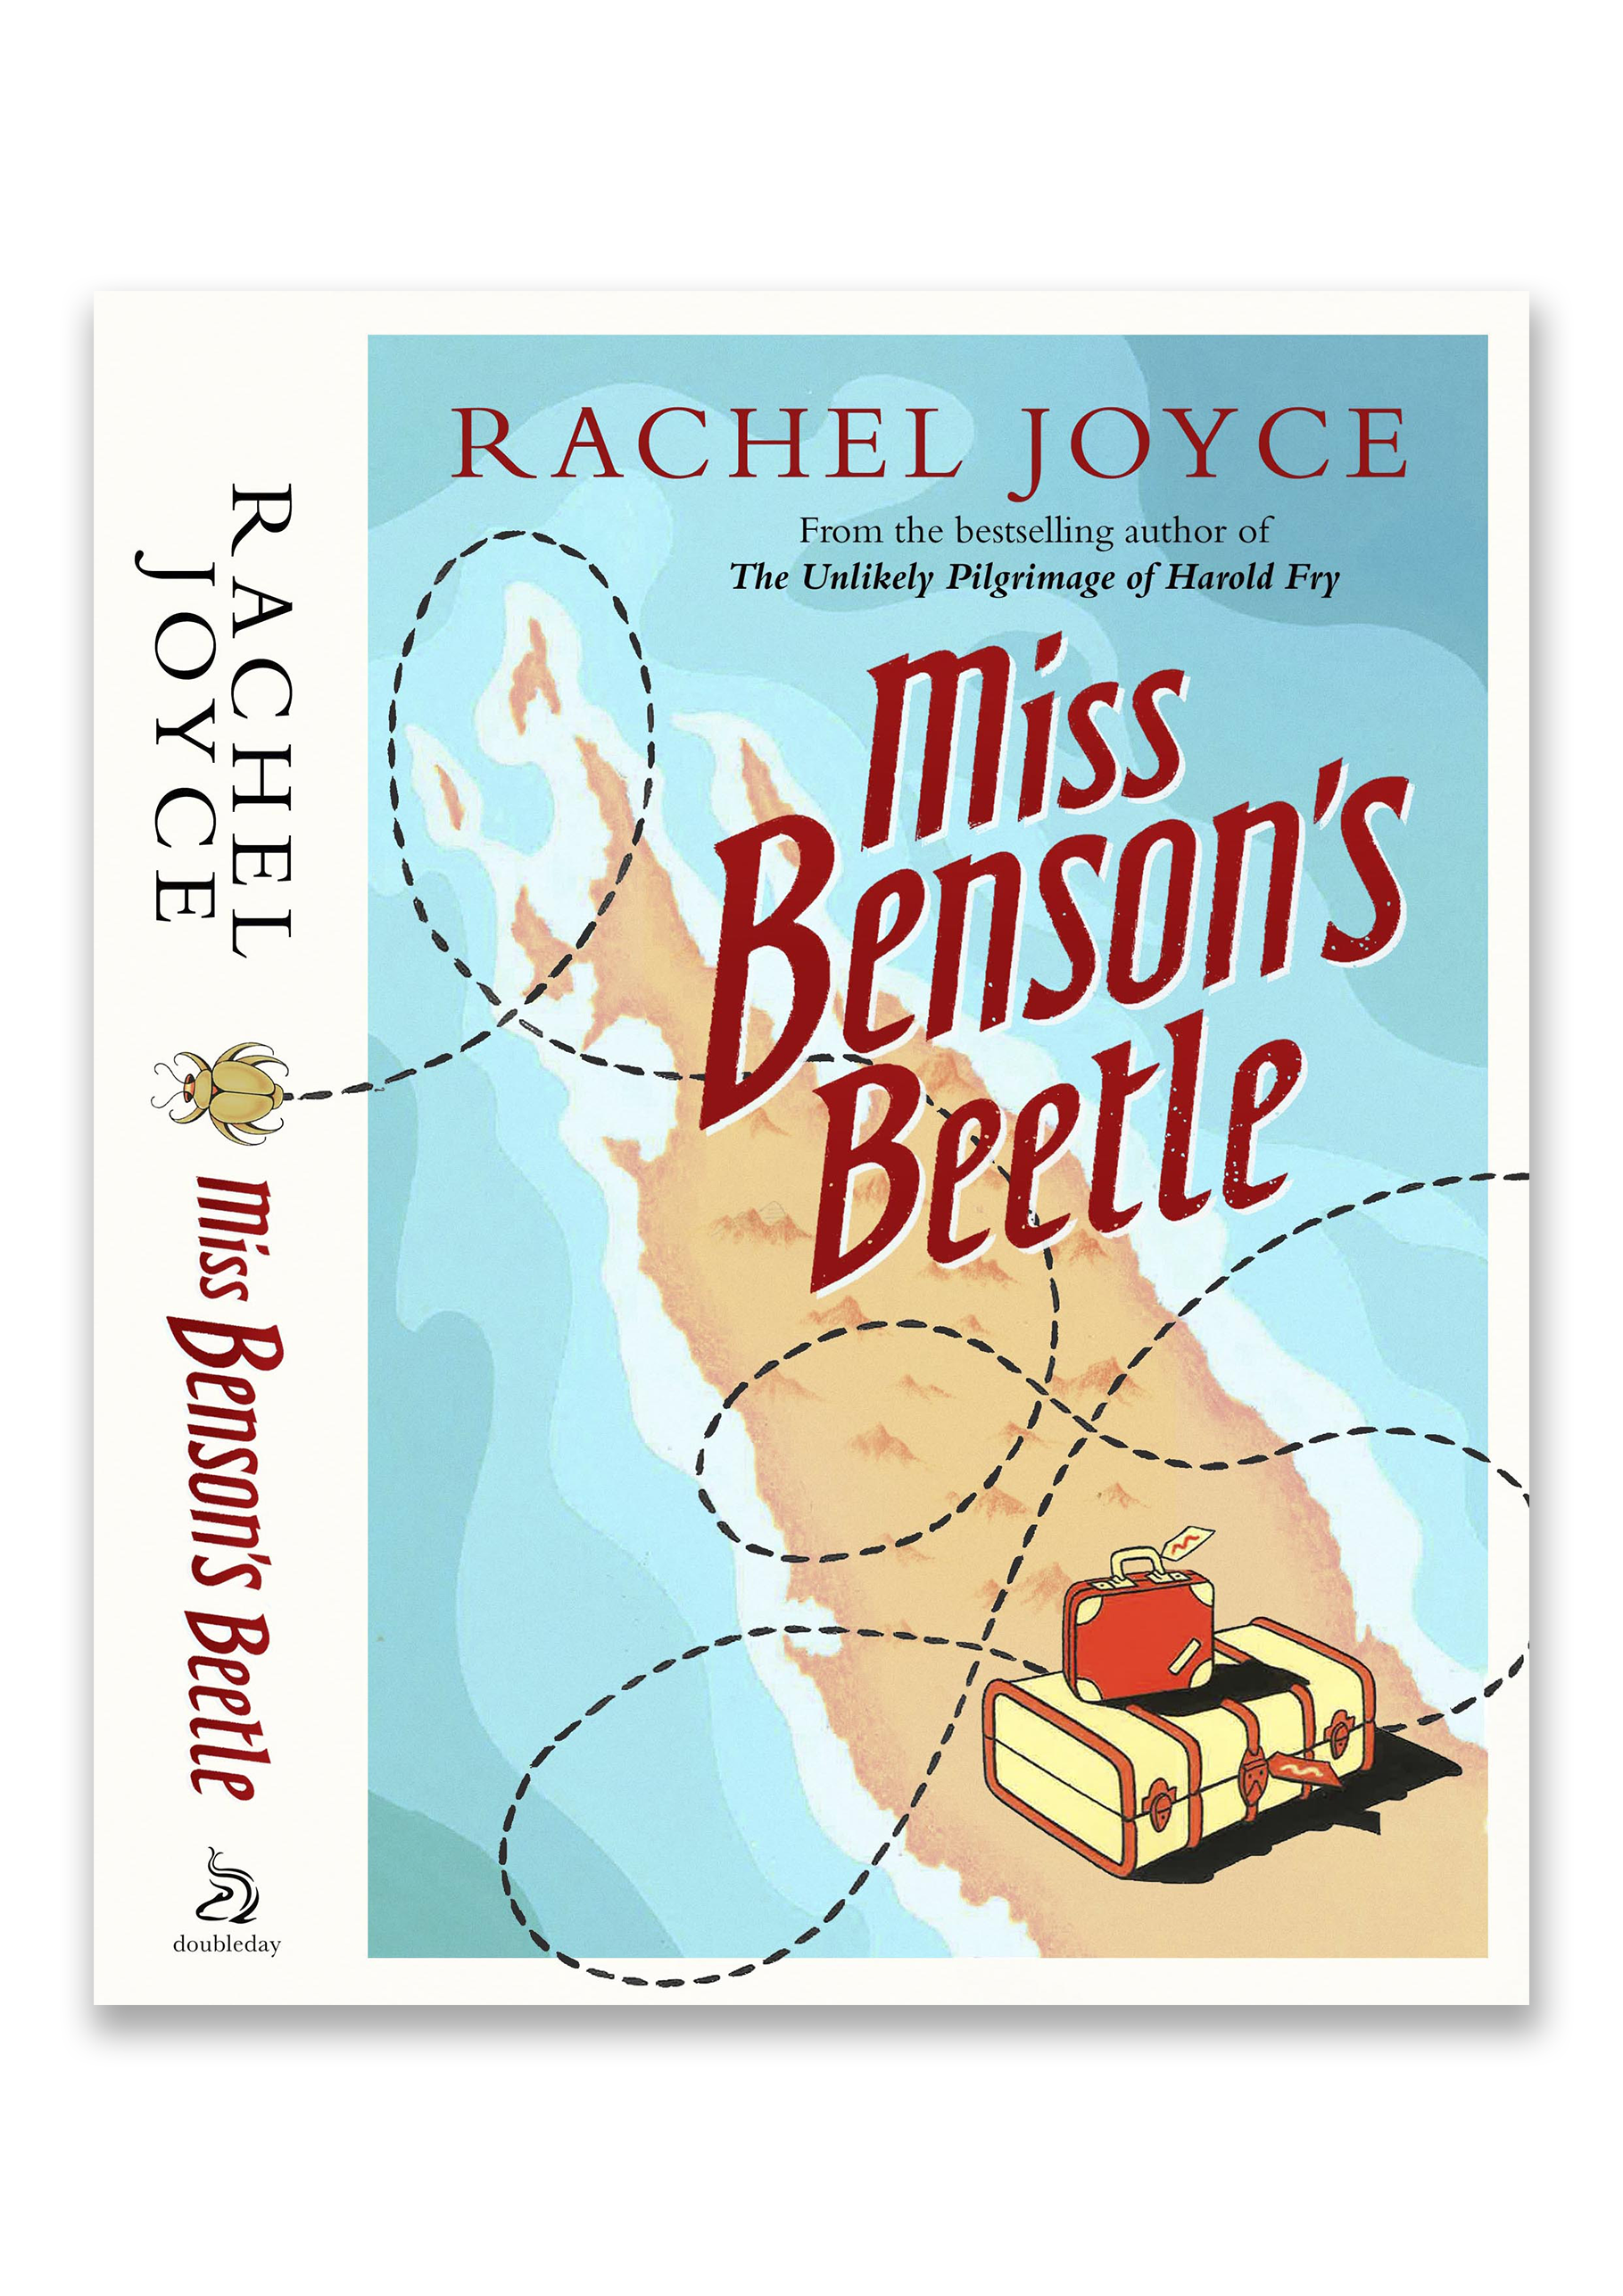 An illustrated map version of Miss Benson's Beetle